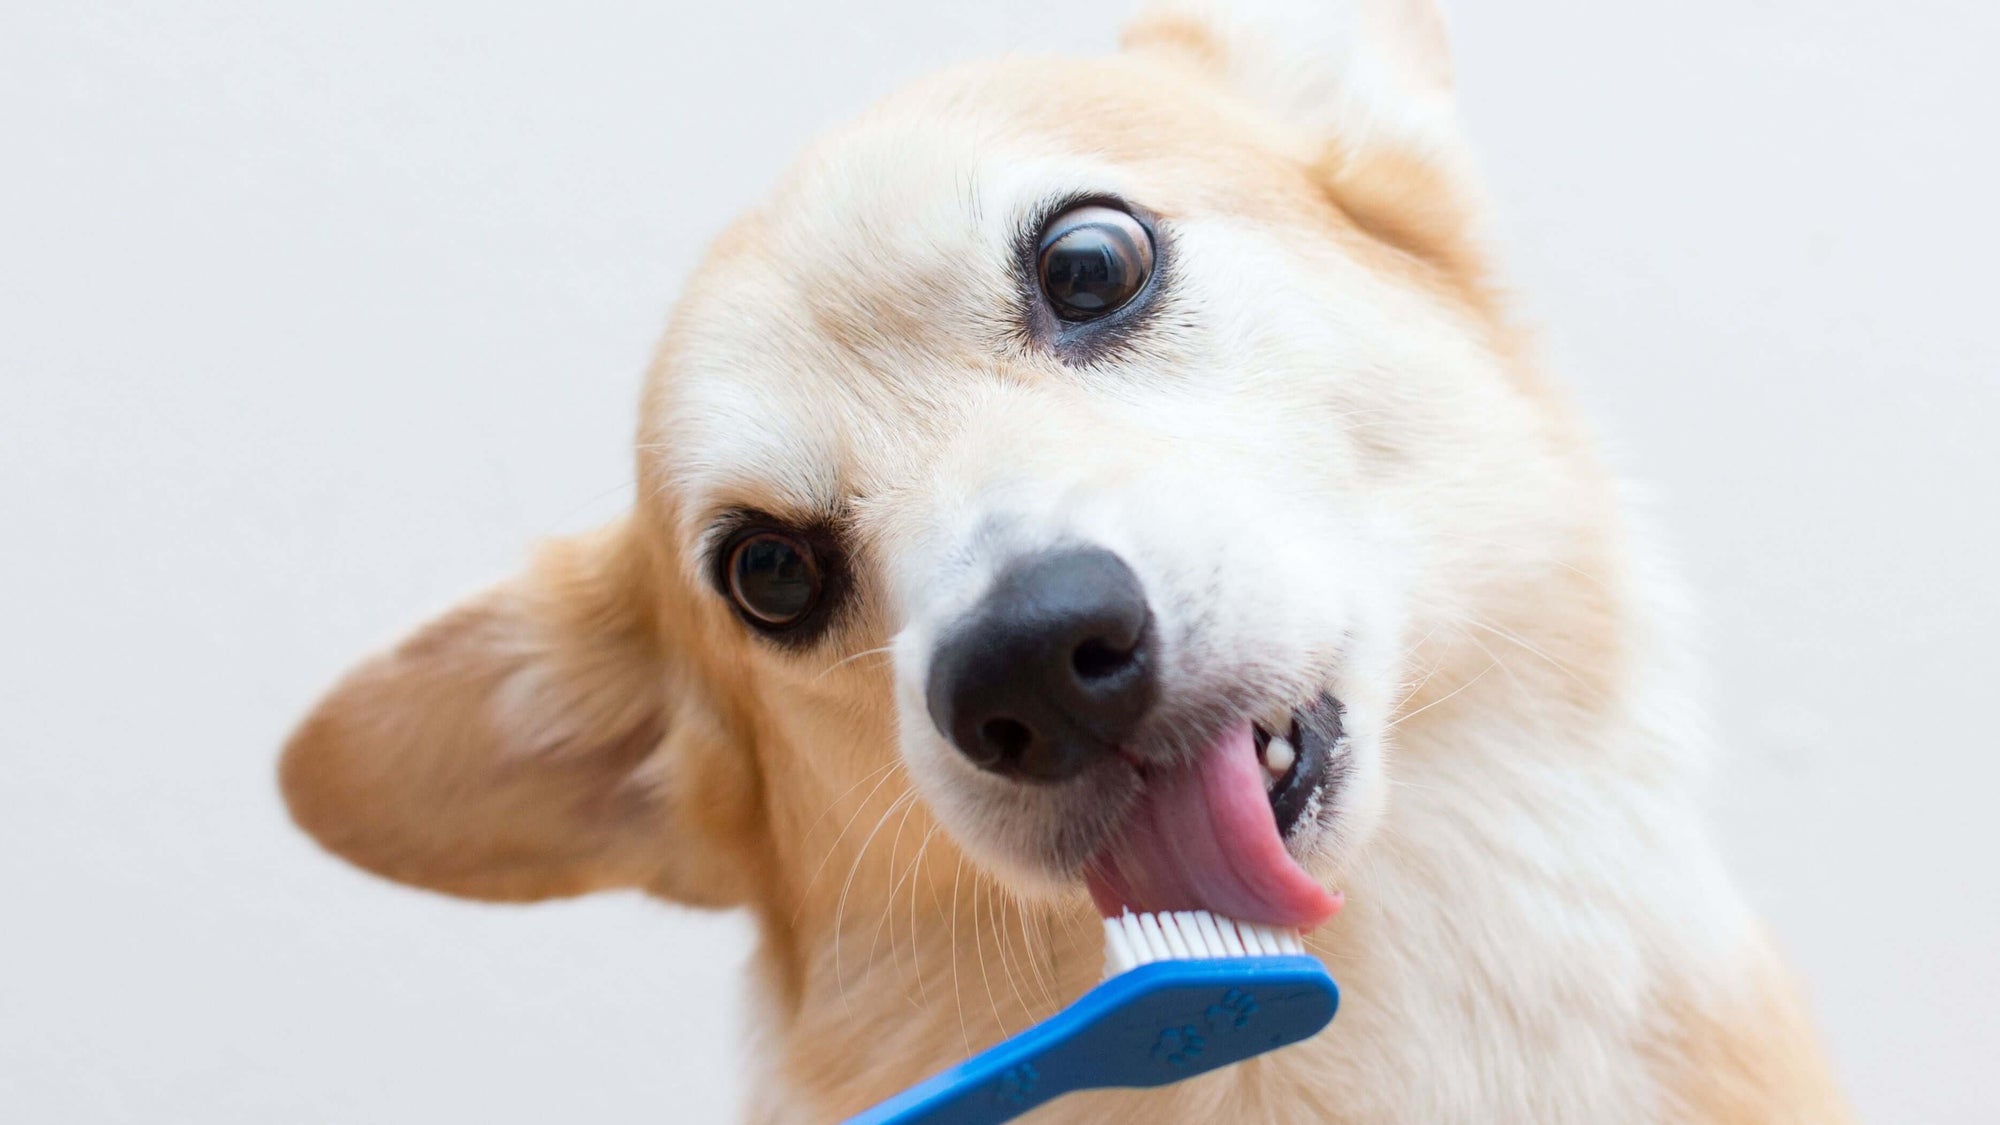 Can you use human toothbrush on dogs?